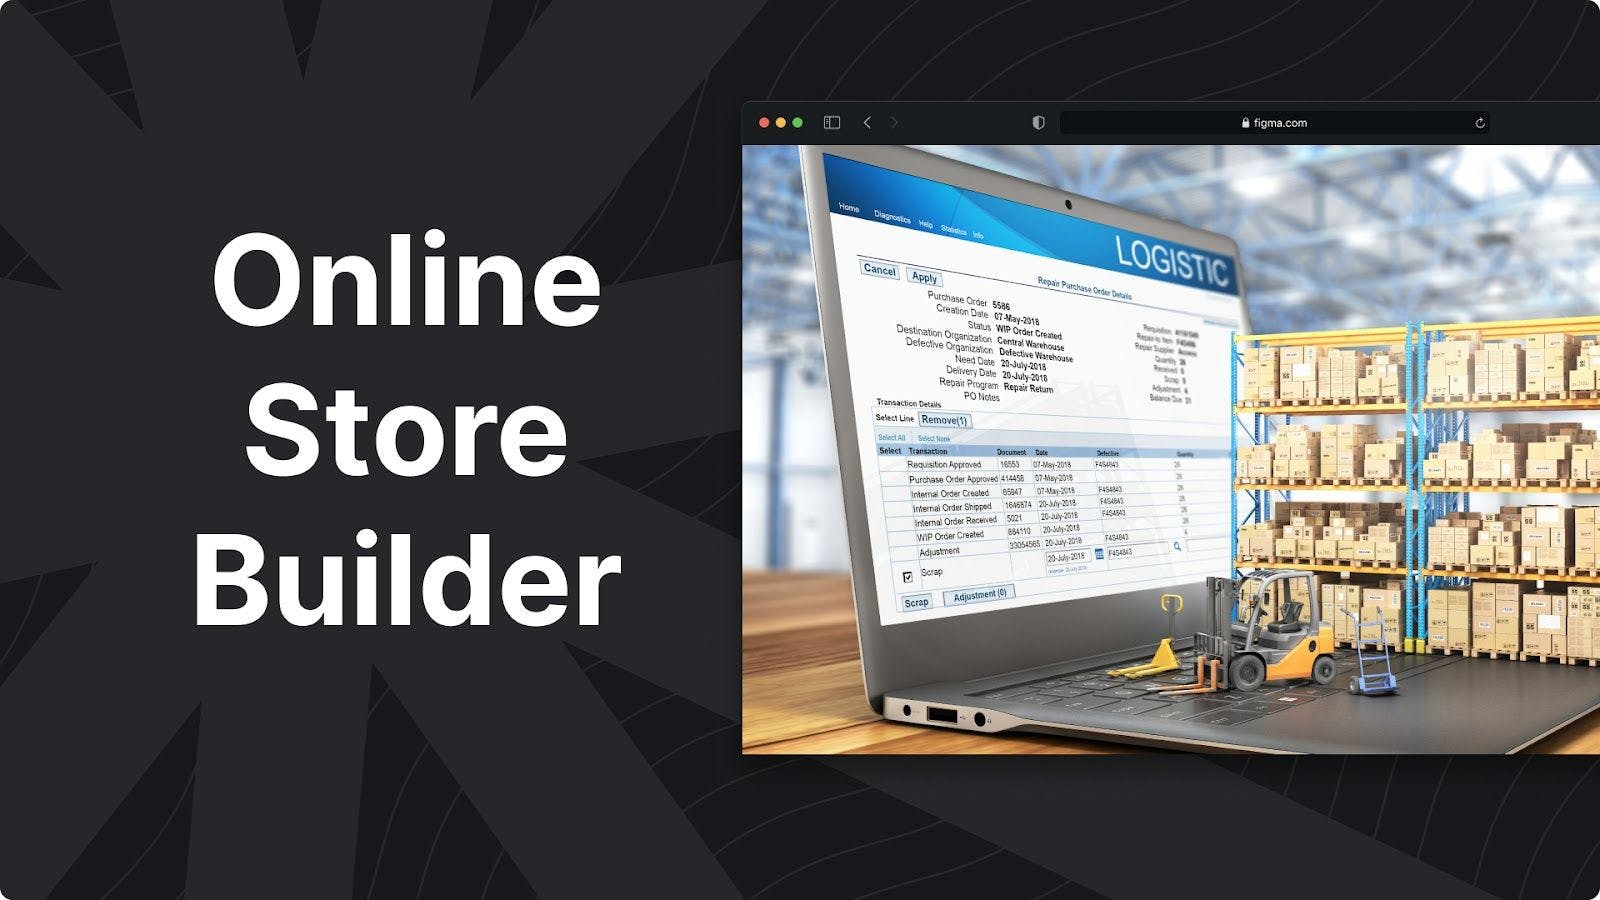 Online Store Builder: Simplifying eCommerce for Your Team